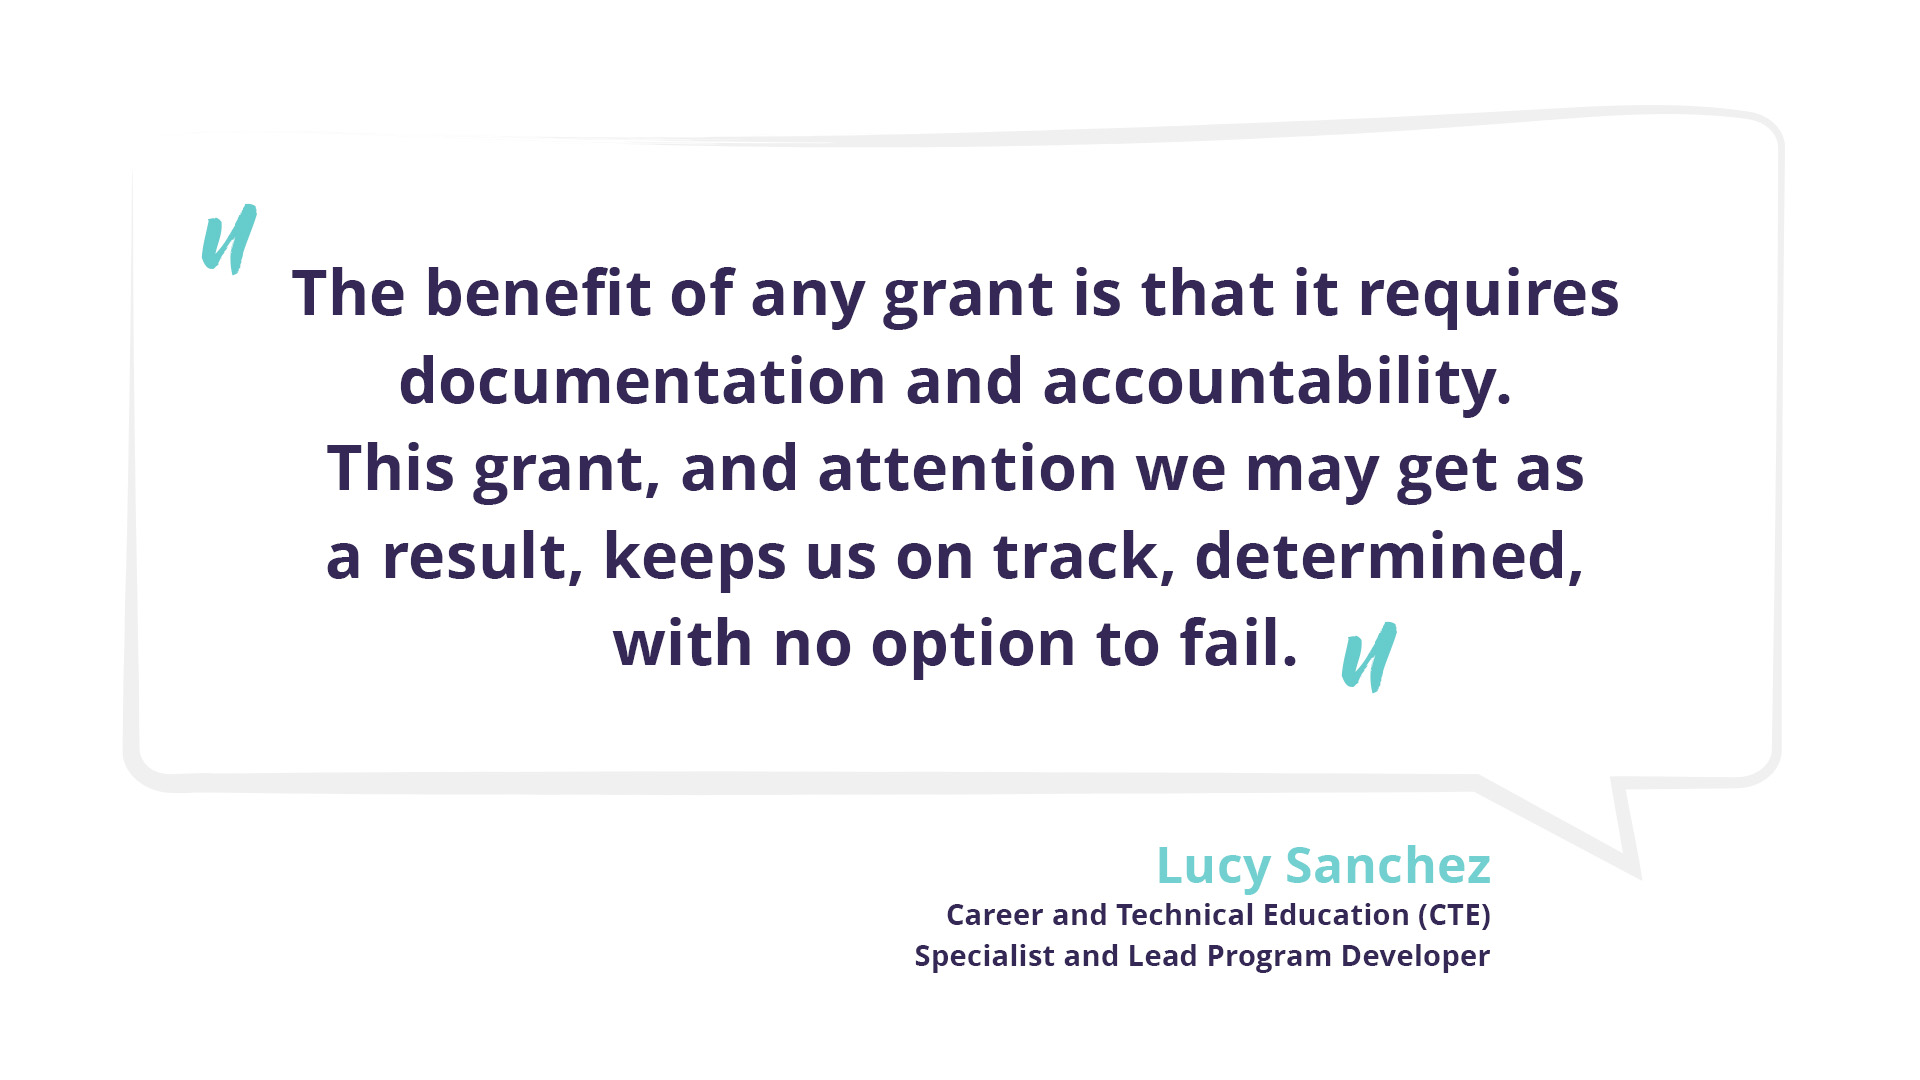 Quote from Lucy Sanchez: The benefit of any grant is that it requires documentation and accountability. This grant, and attention we may get as a result, keeps us on track, determined, with no option to fail.